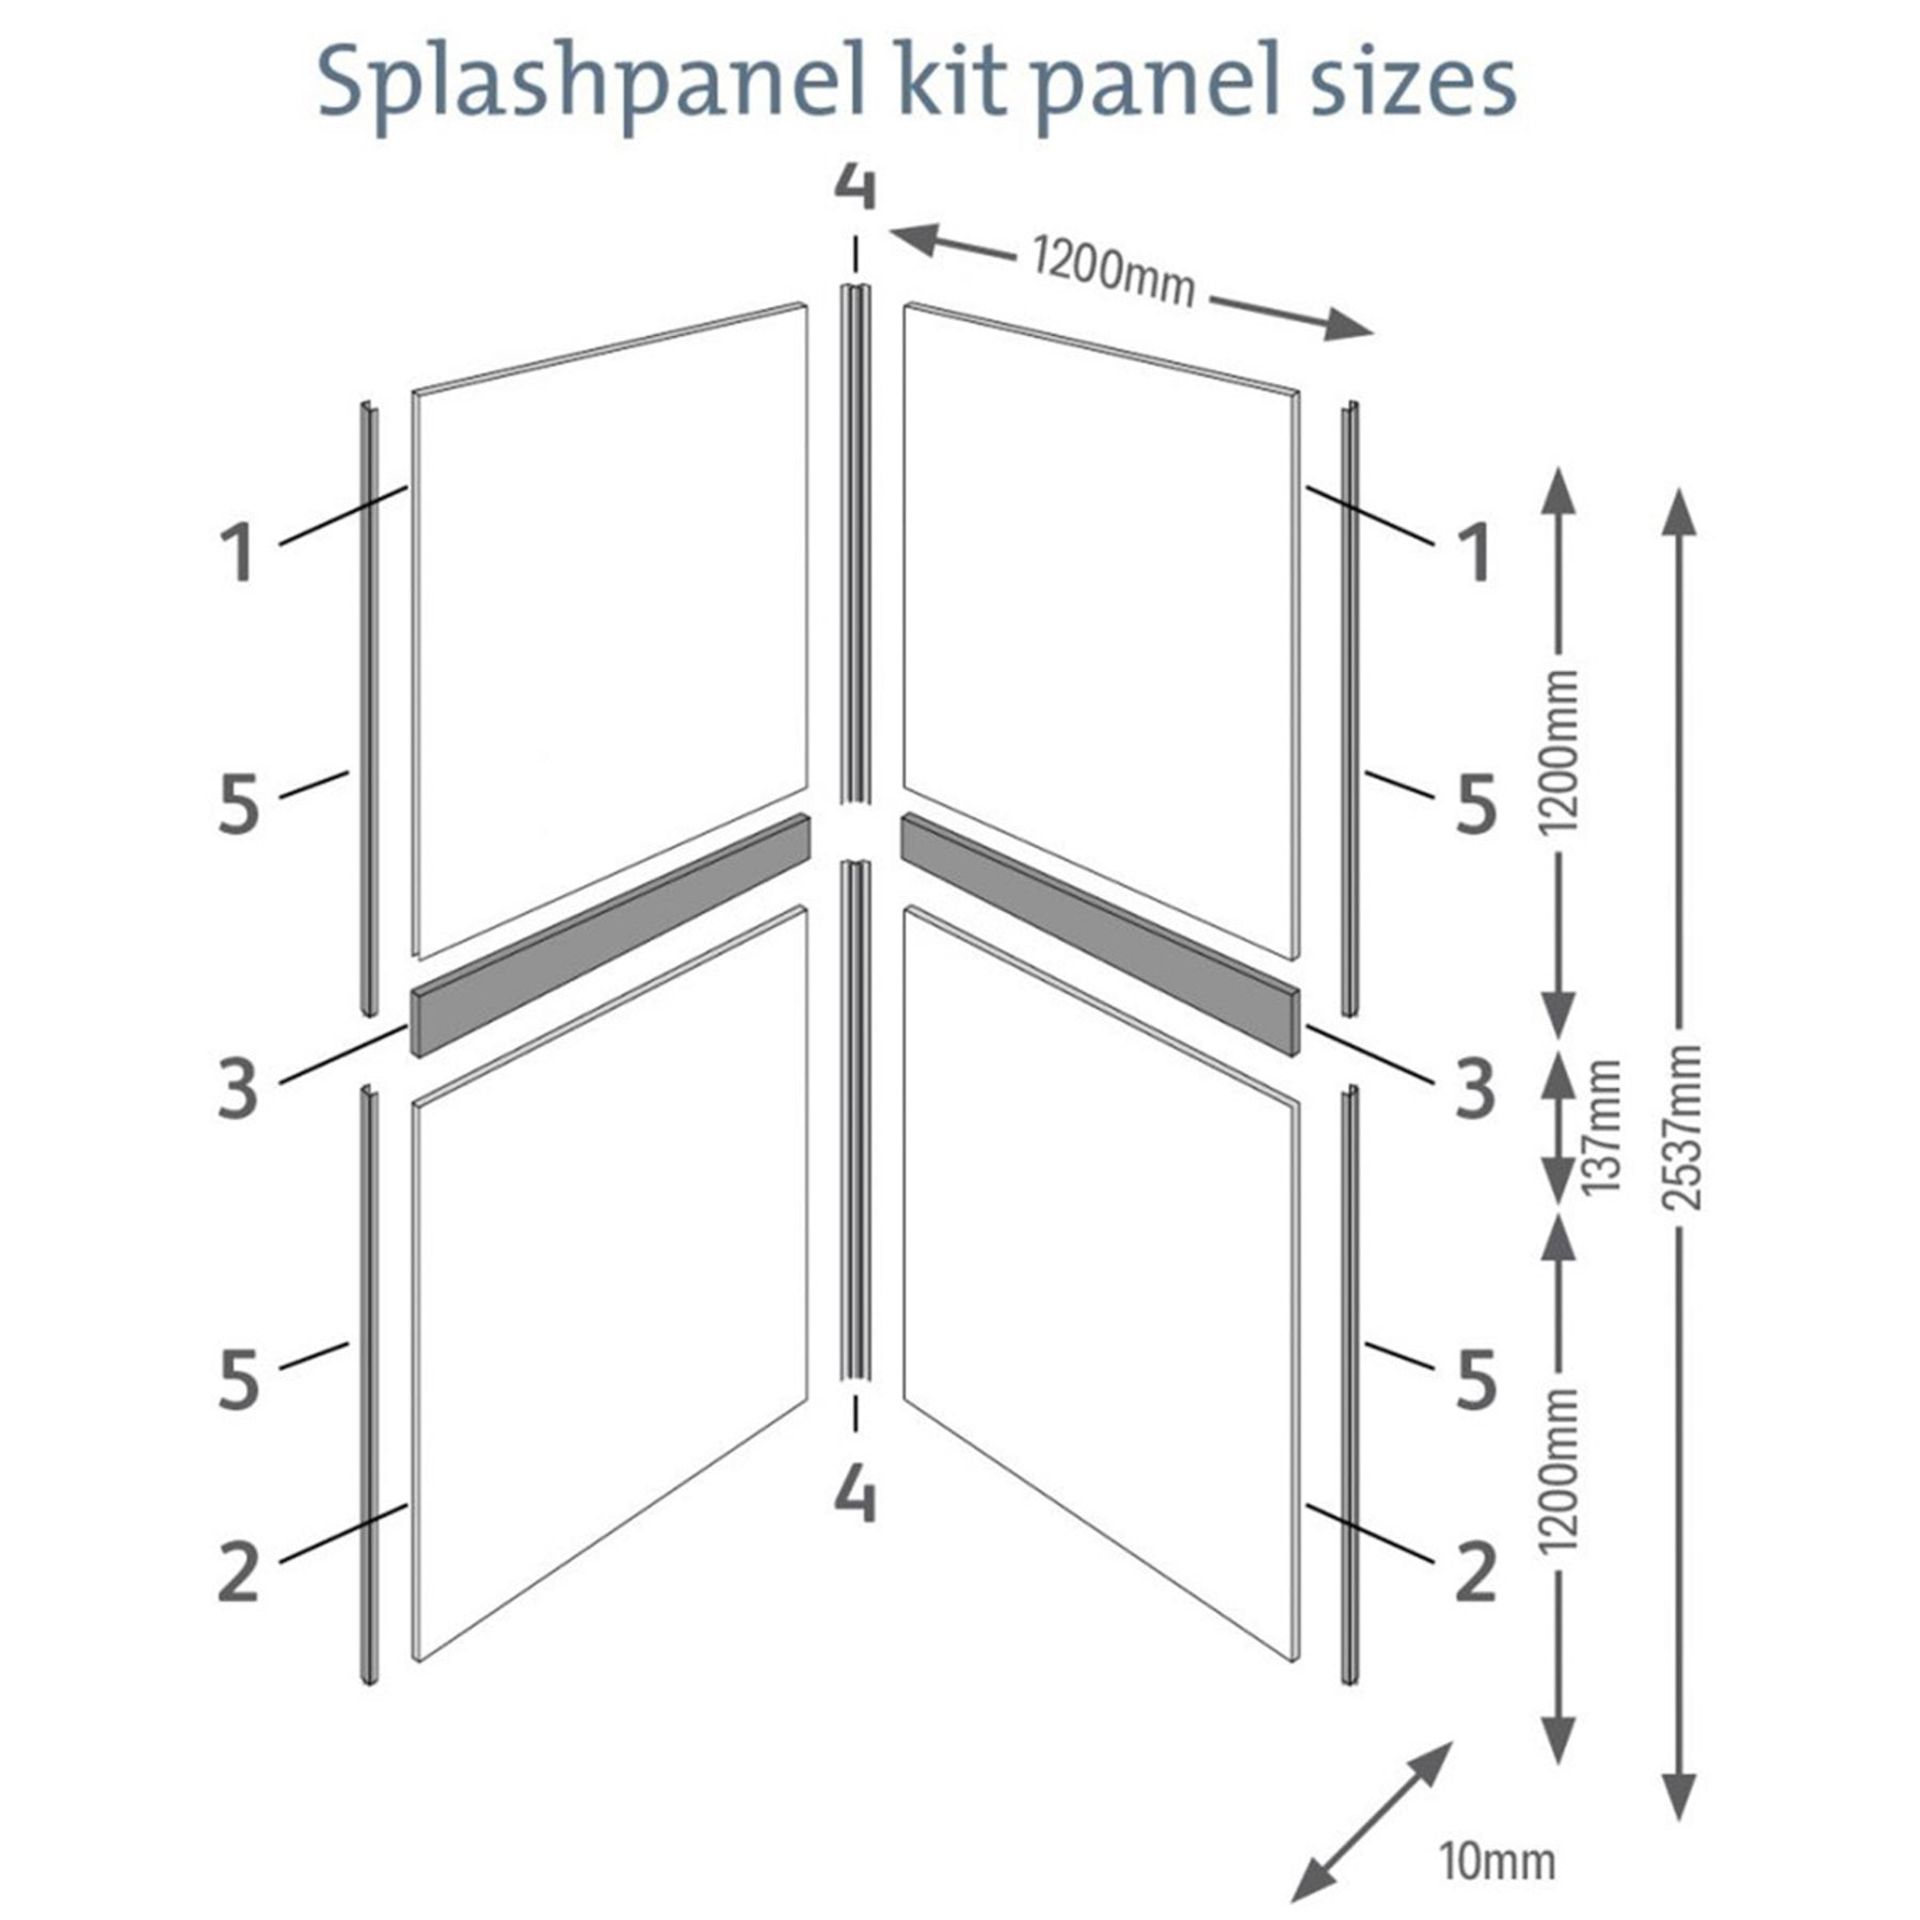 Splash Panel 2 sided shower wall kit in Artic Sparkle gloss, new and boxed, the kit contains 2 - Image 4 of 4